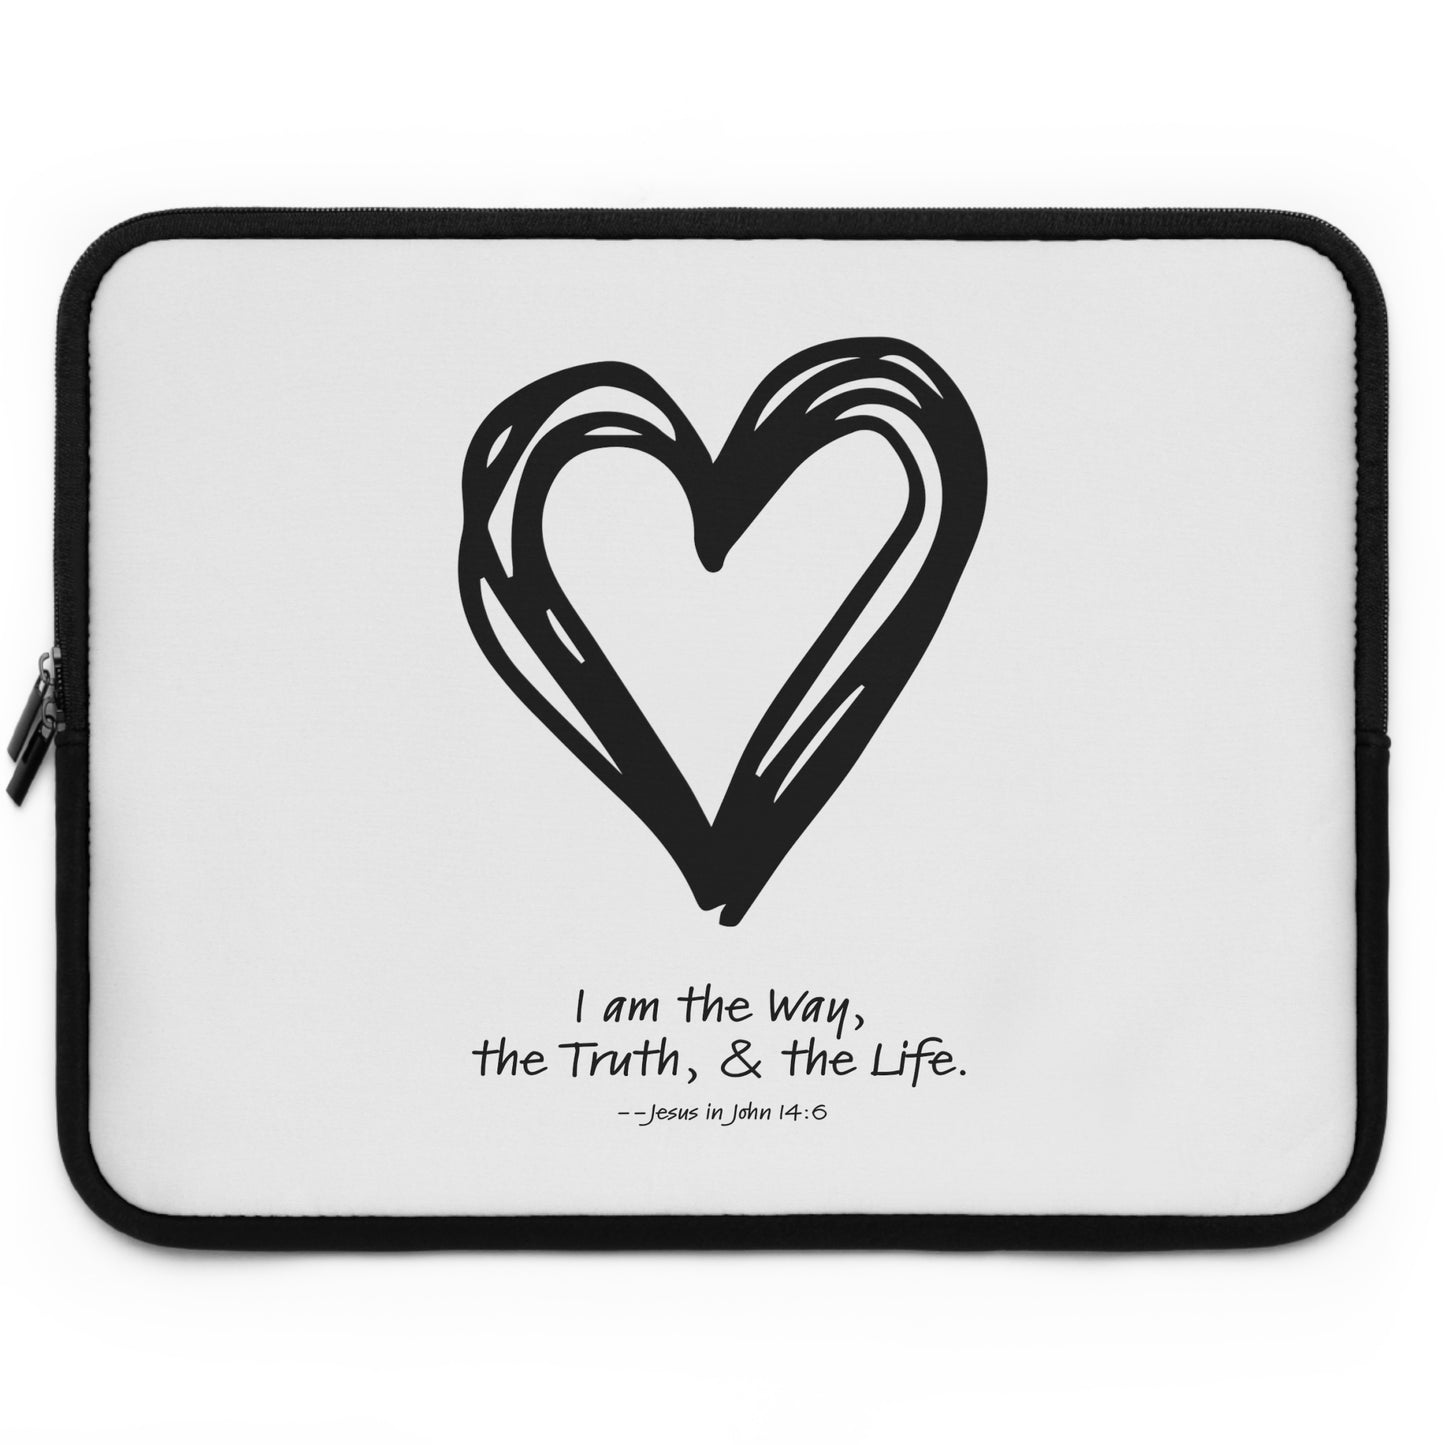 Laptop Sleeve - The Way, The Truth, & The Life